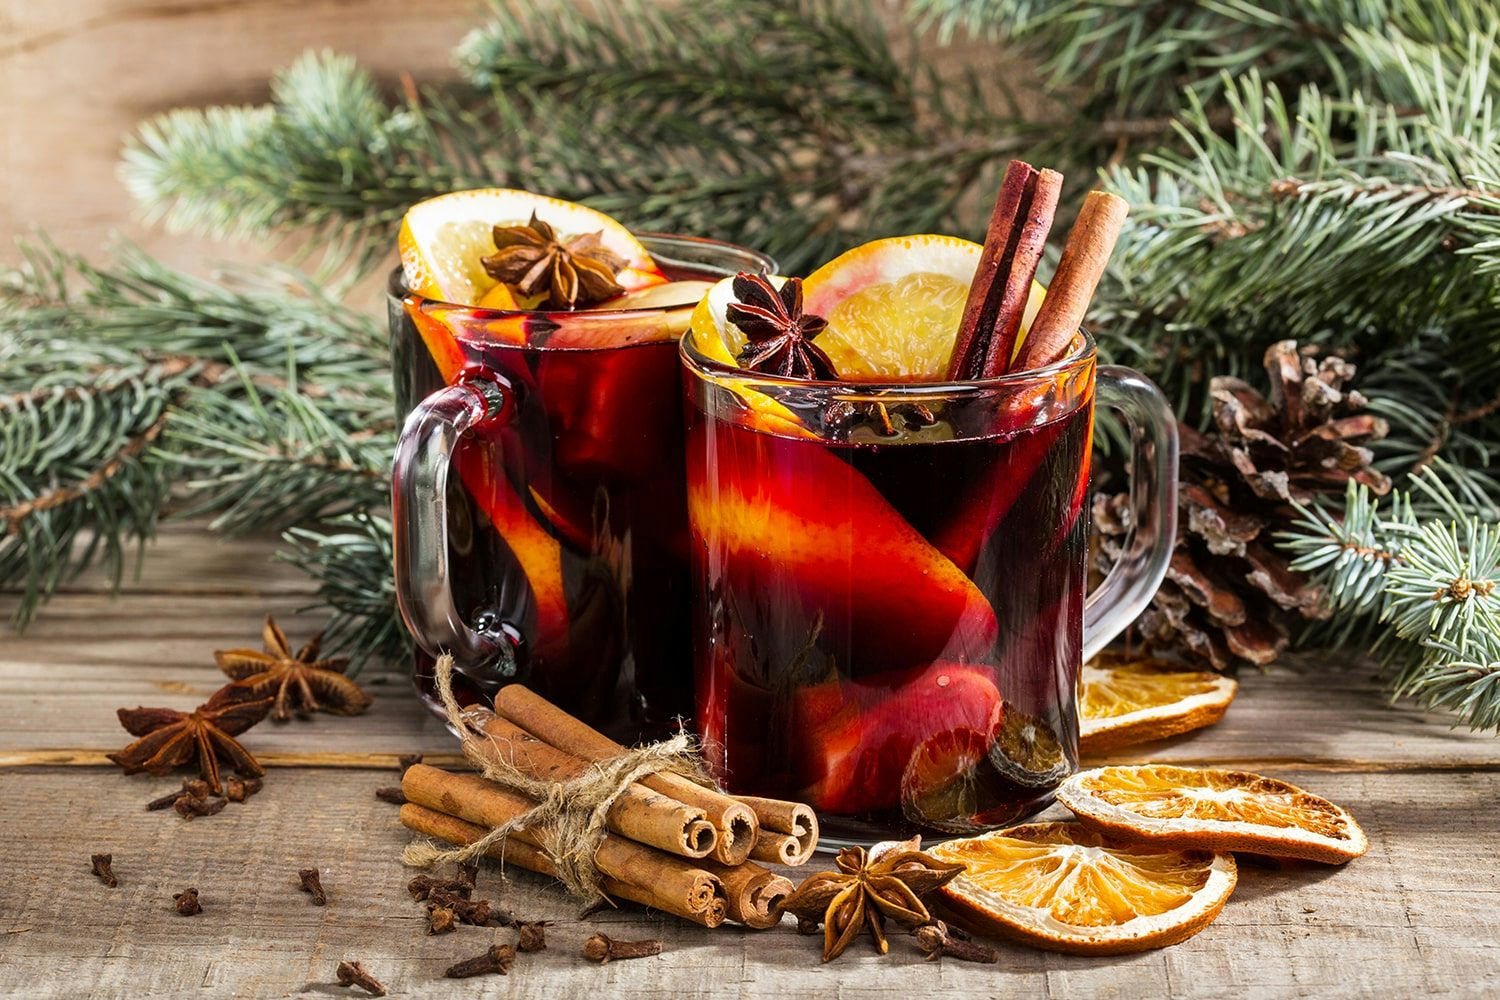 Bottoms Up – Win At Xmas With This Perfect Mulled Wine Recipe